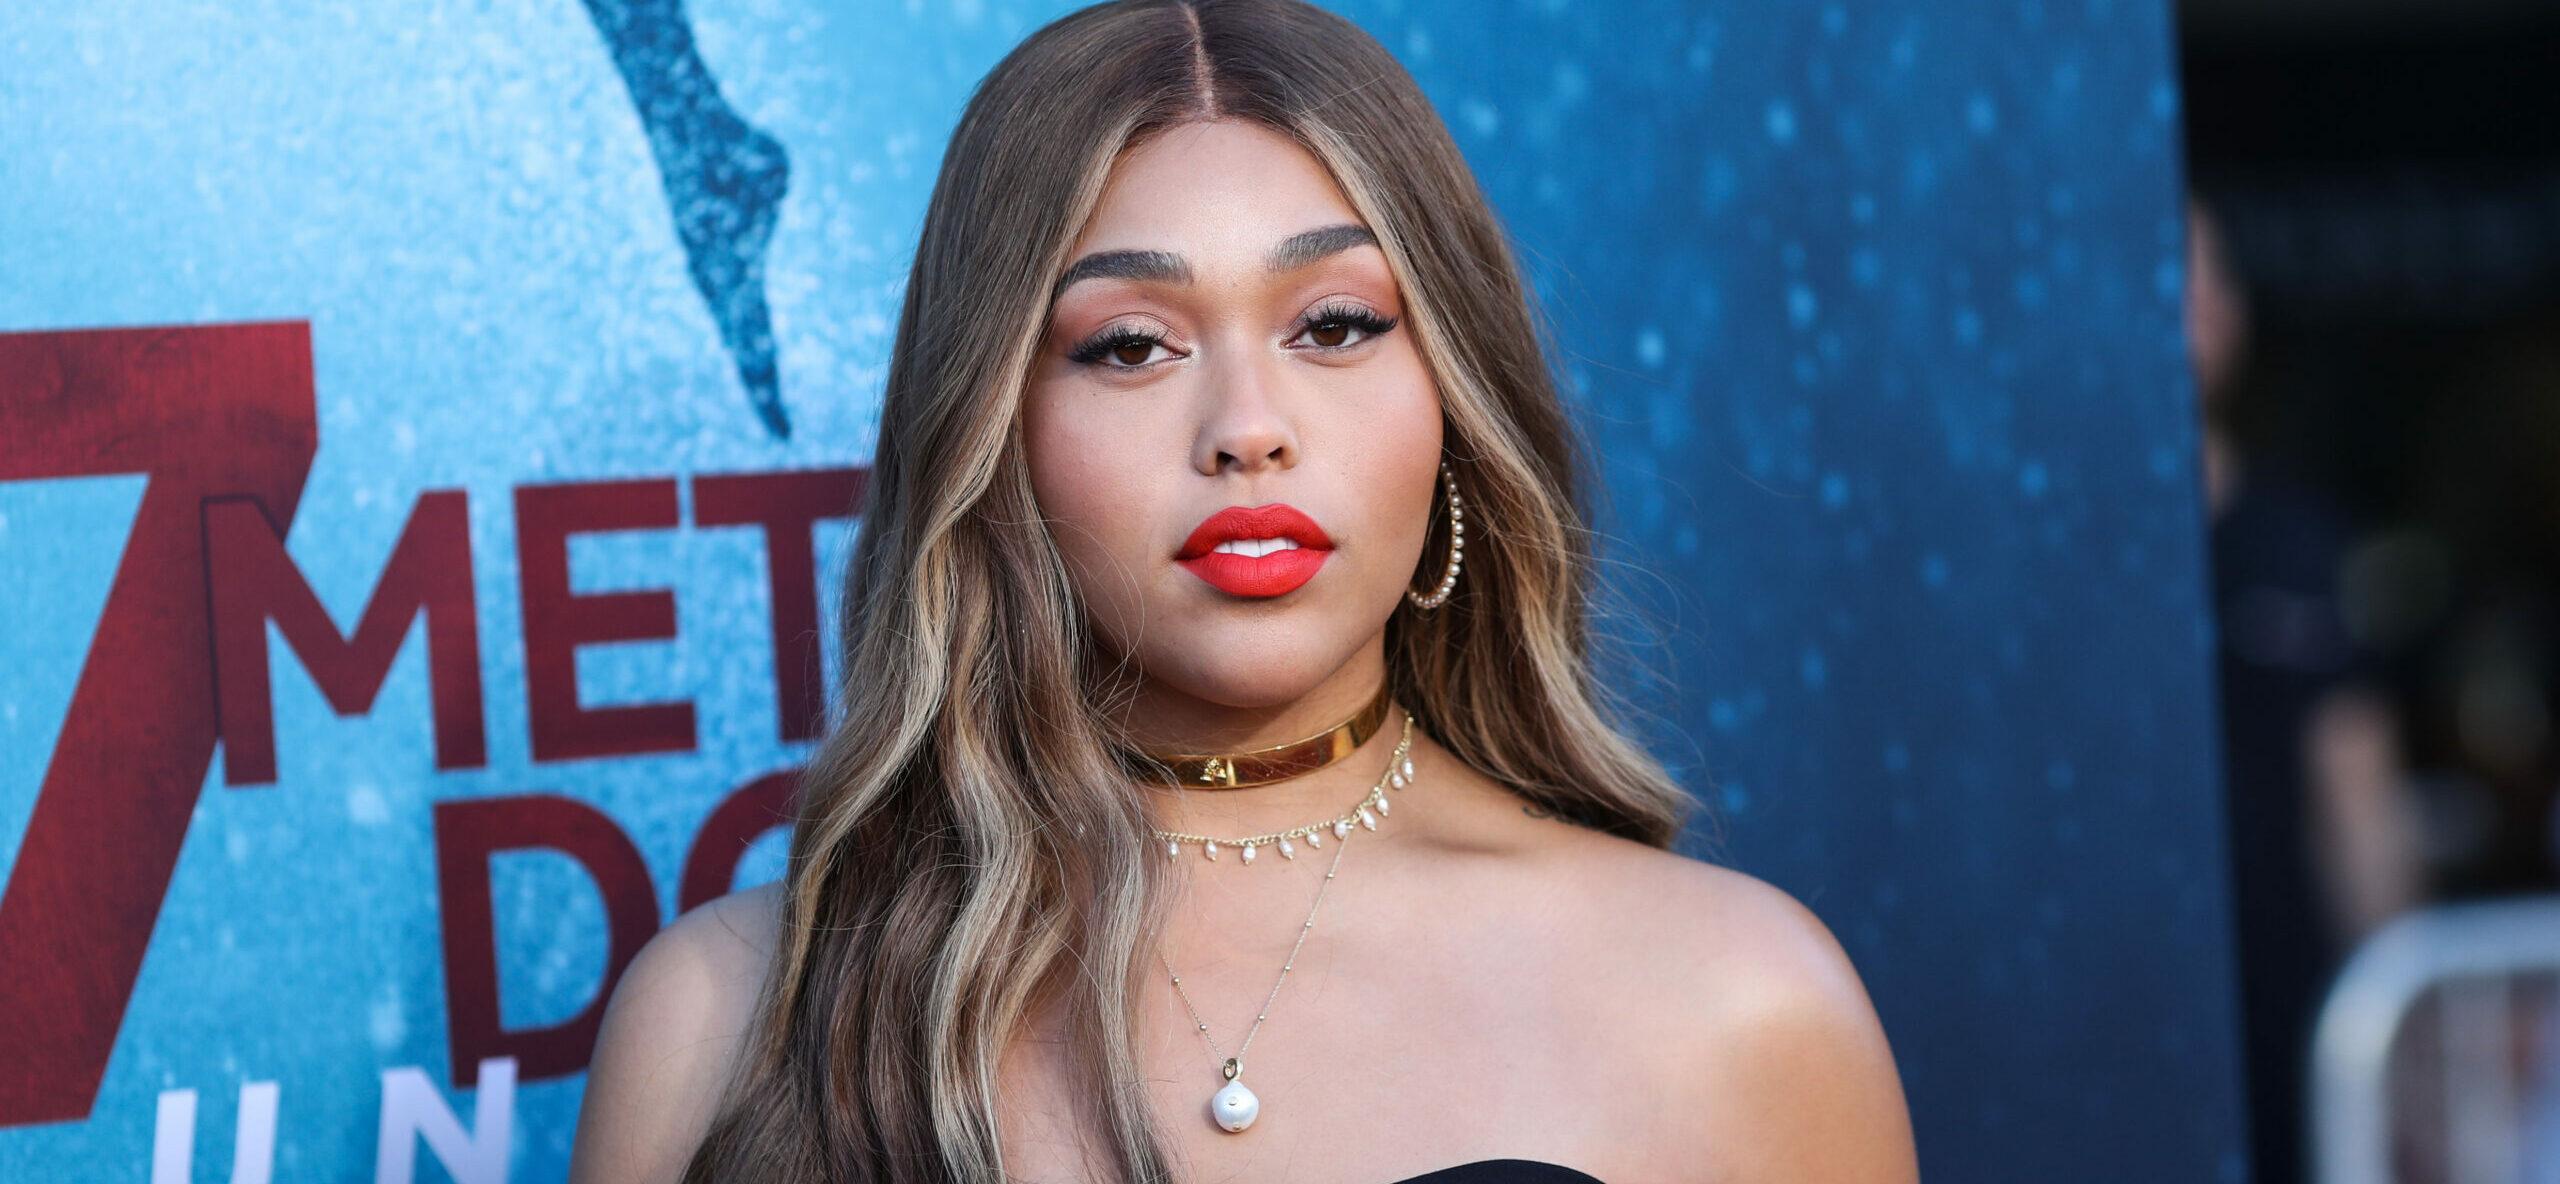 Jordyn Woods Transformation: Teeth, Weight Loss and More!